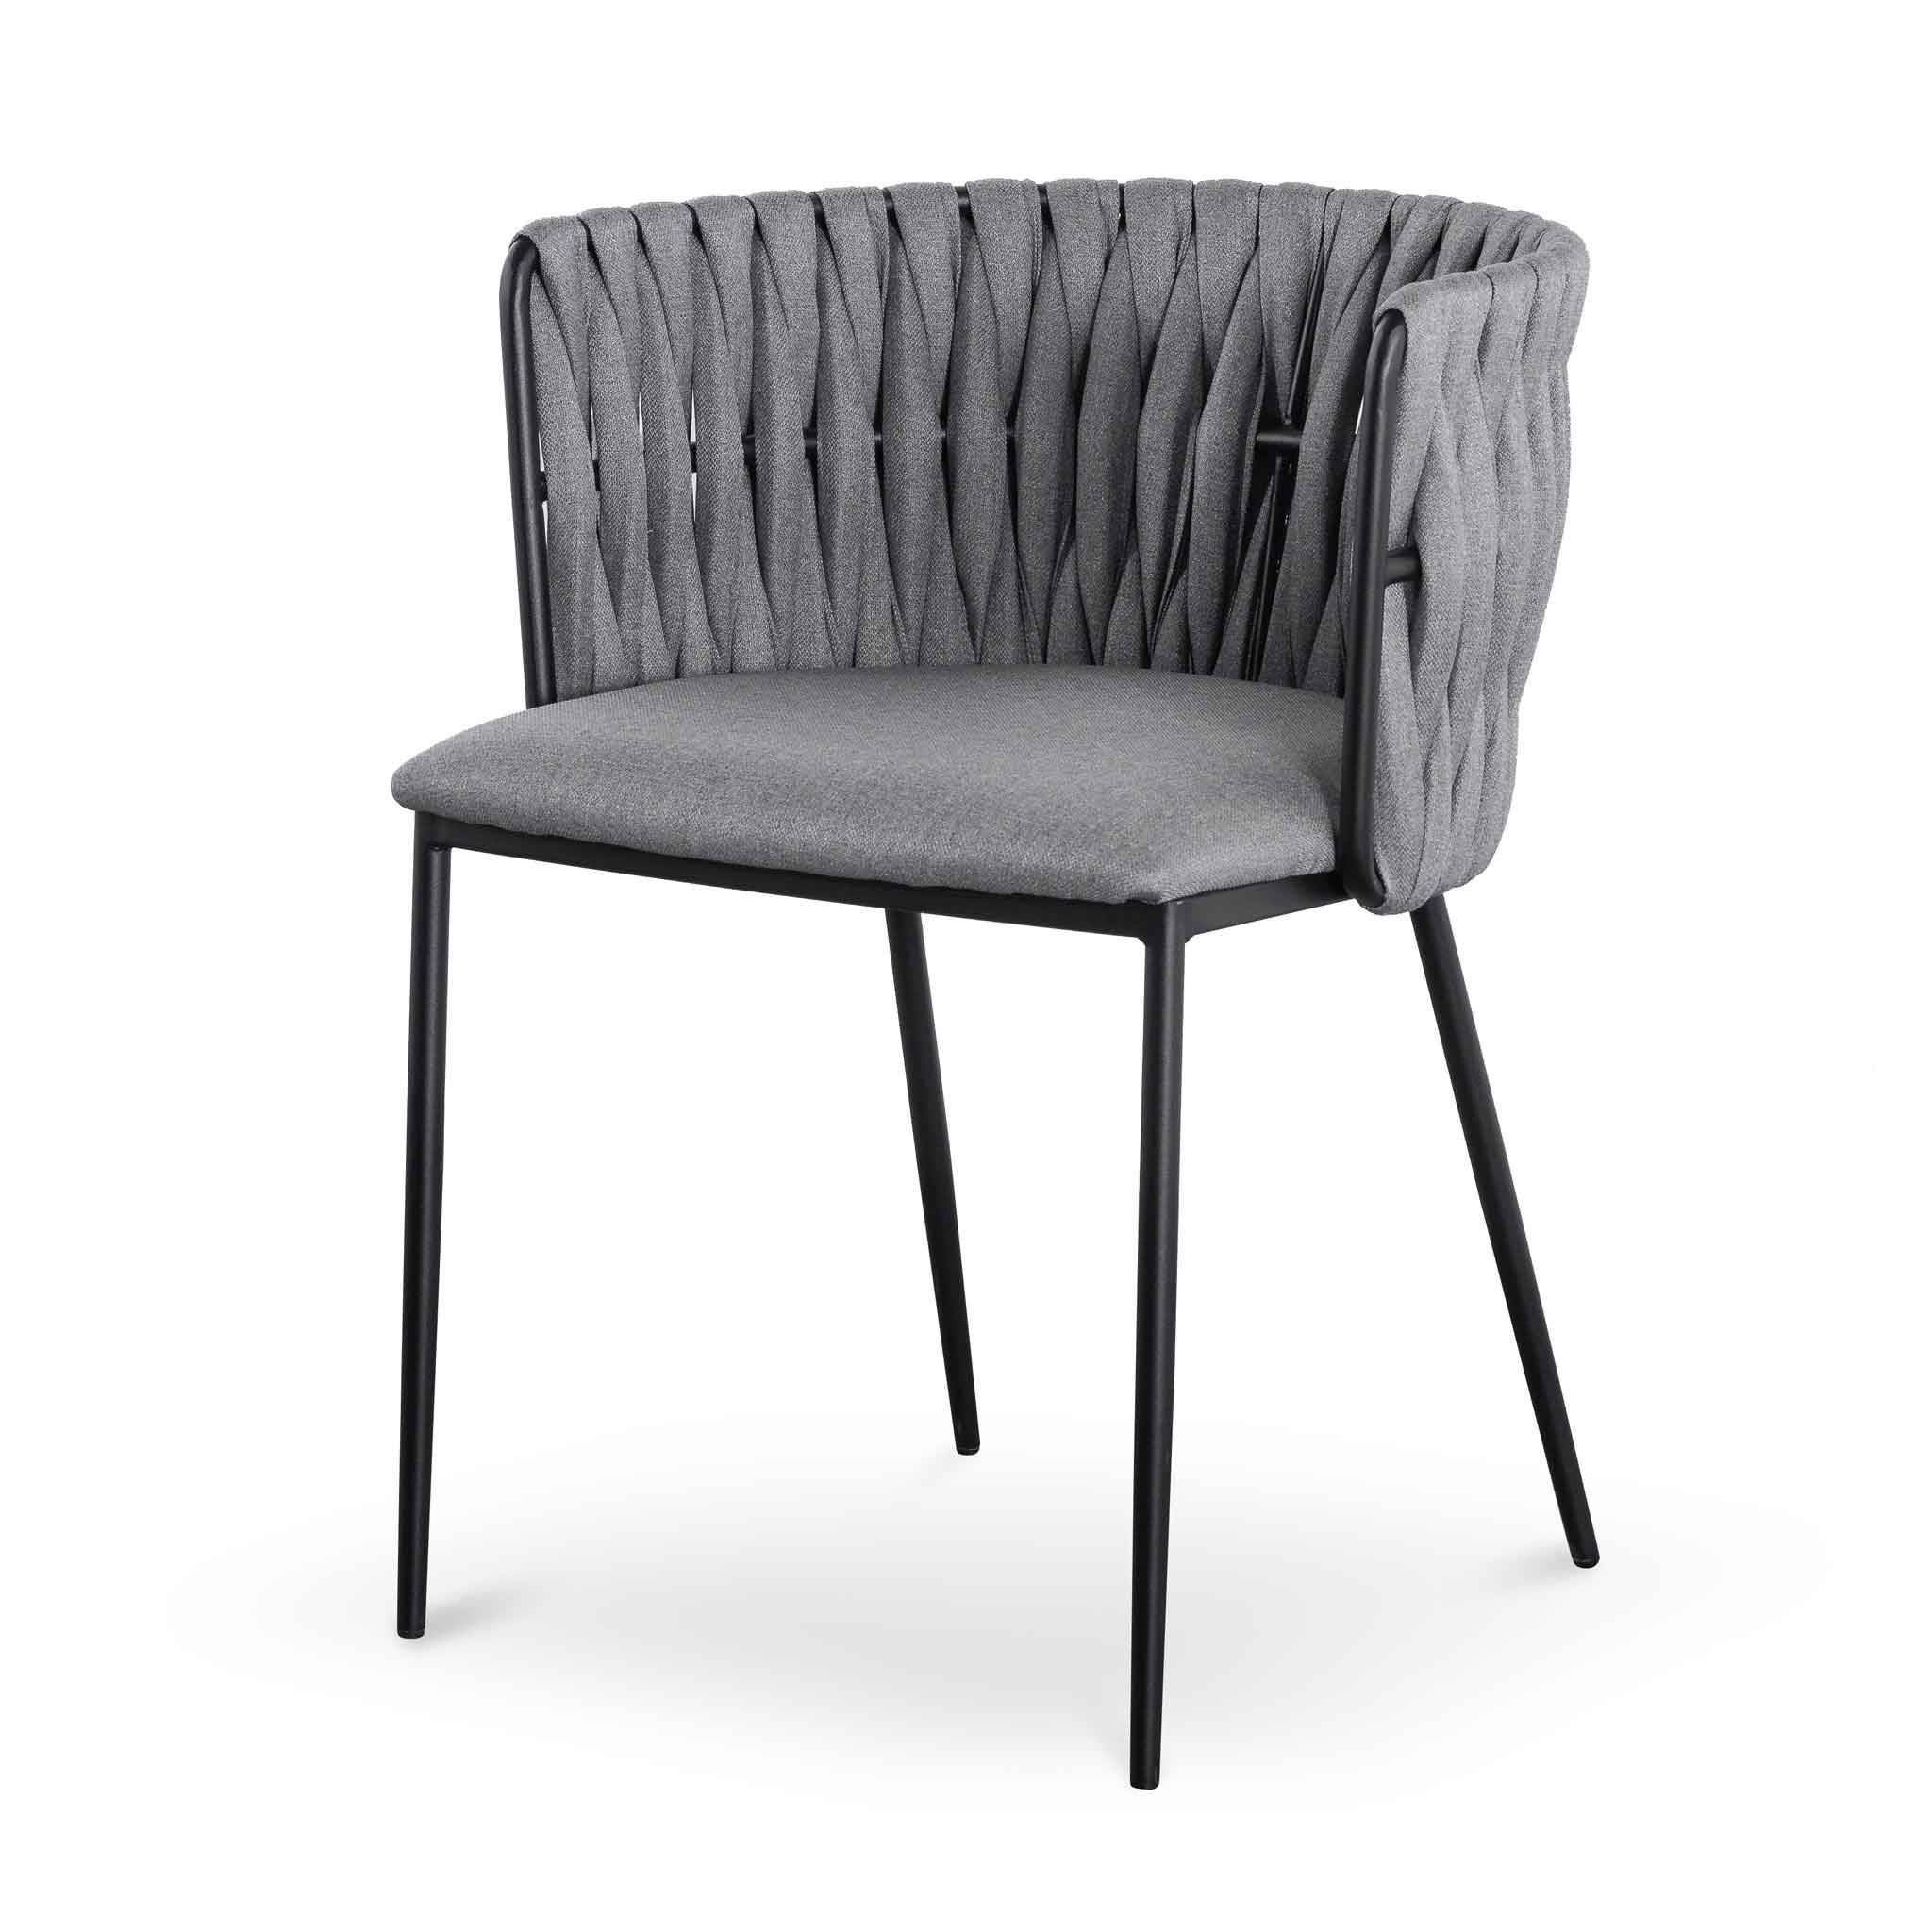 Piper Fabric Dining Chair - Coin Grey with Black Legs